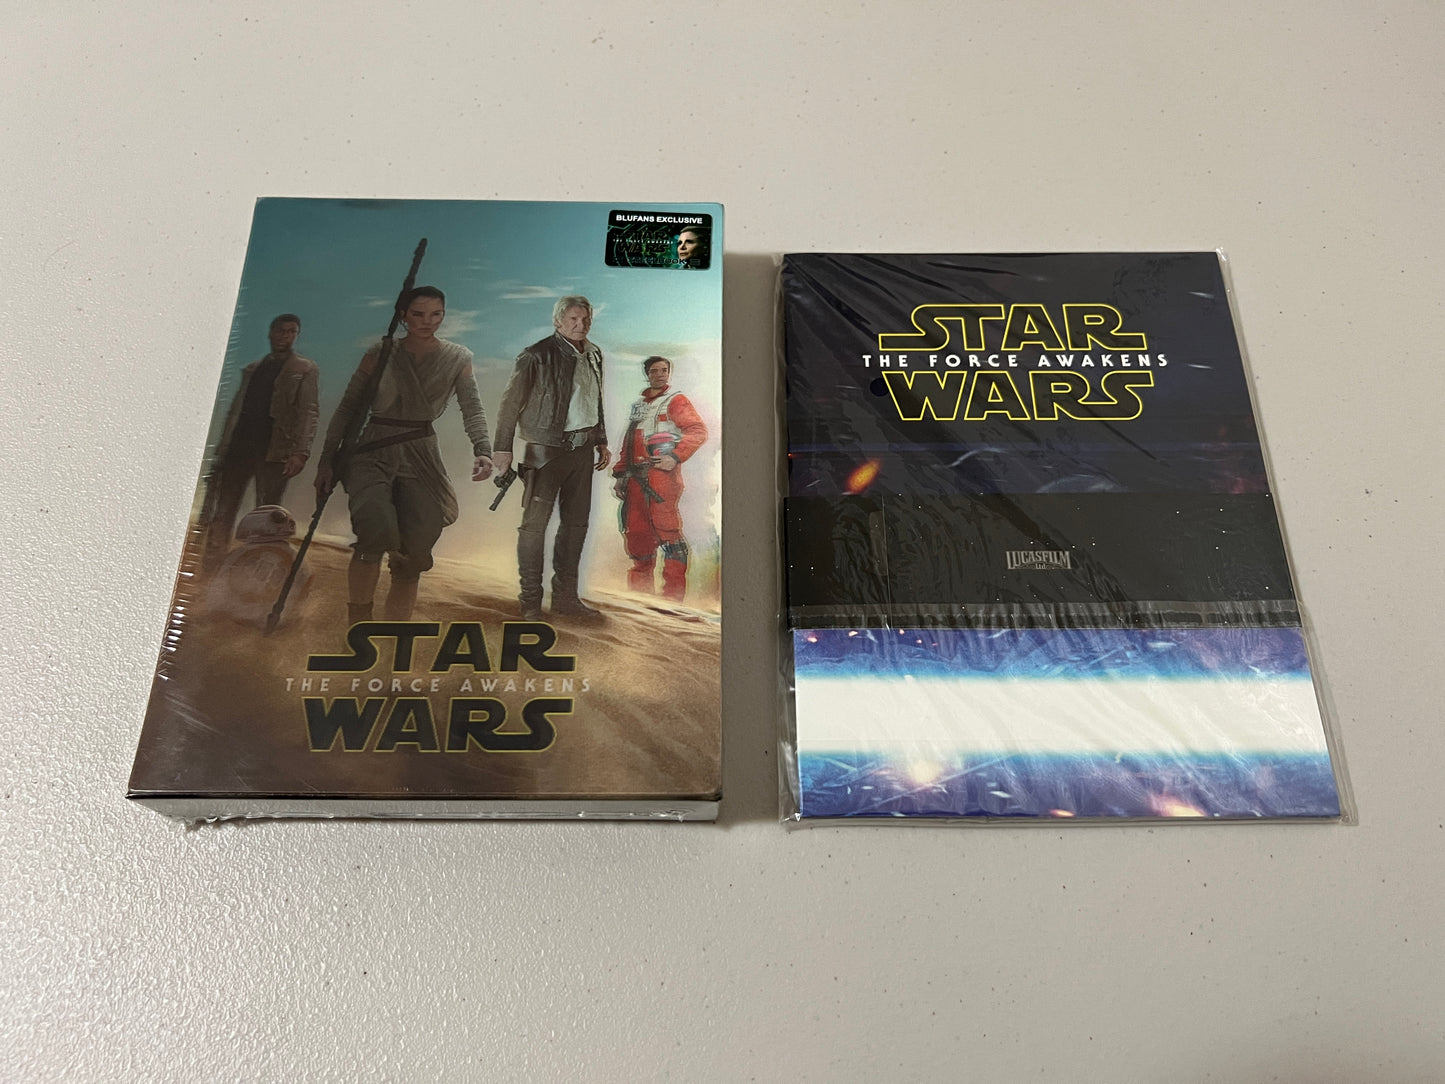 Star Wars: The Force Awakens (3D + 2D Blu-ray) Steelbook Blufans Exclusive #40 Double Lenticular + Posters